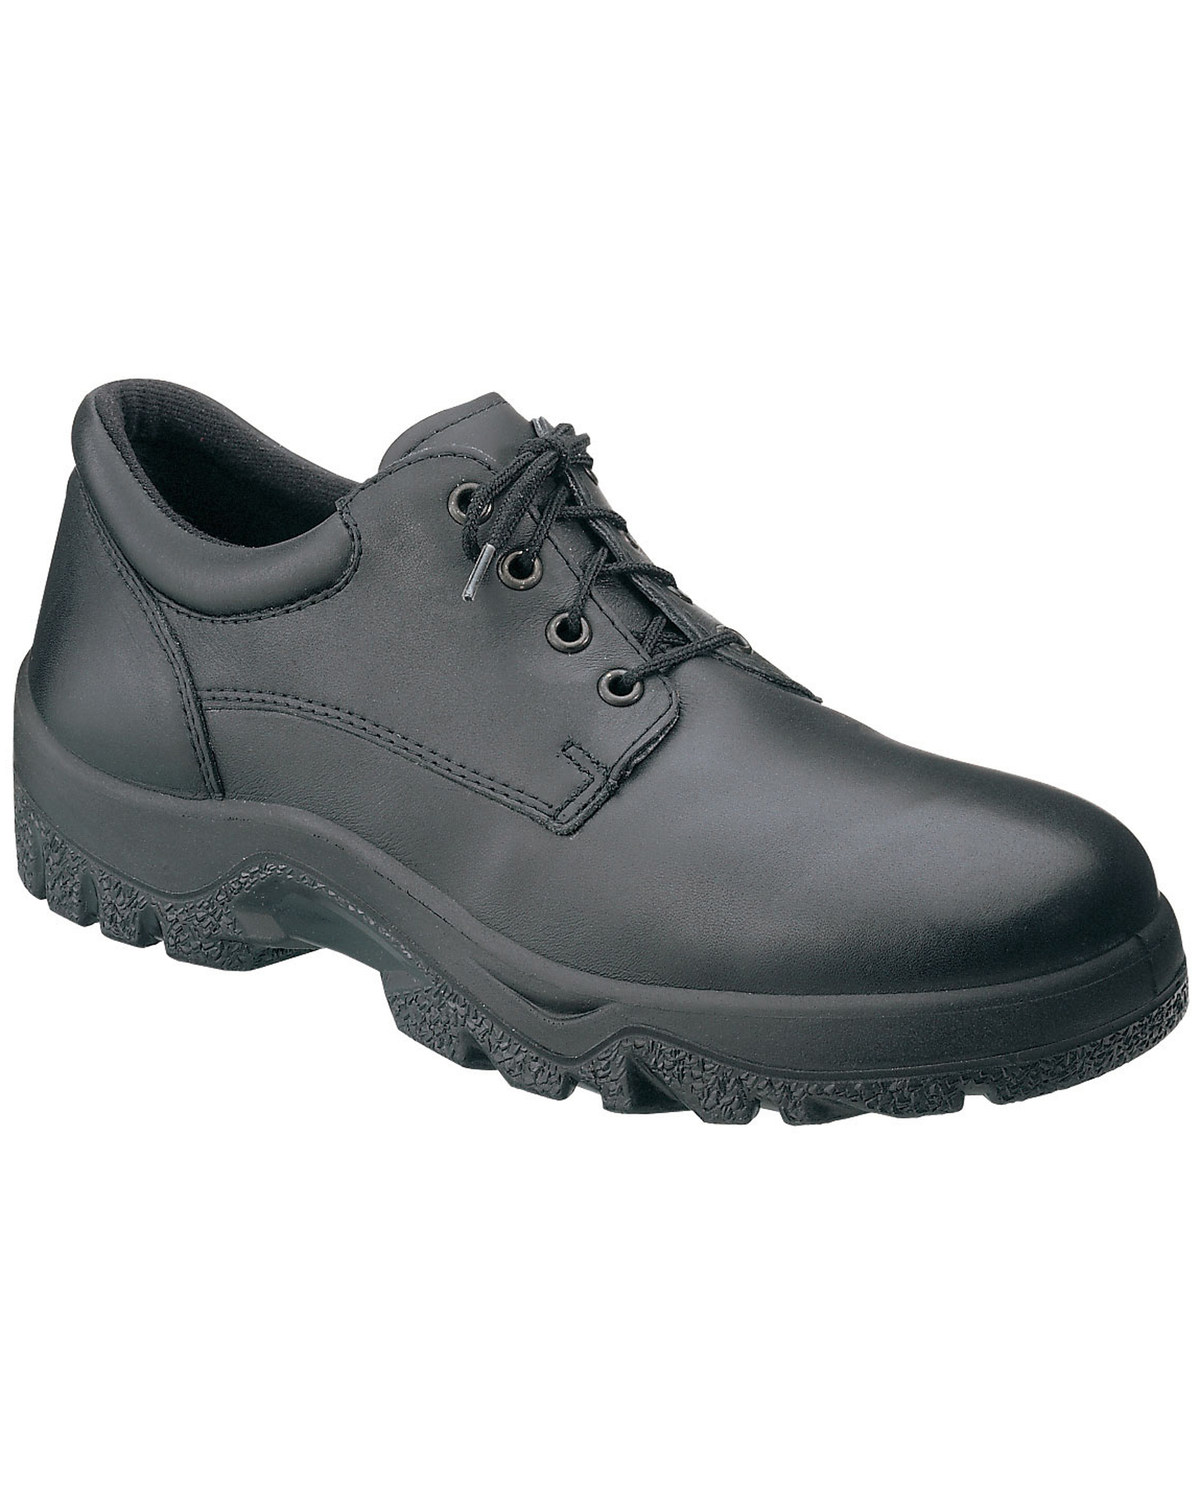 Rocky Men's TMC Postal Approved Oxford Shoes